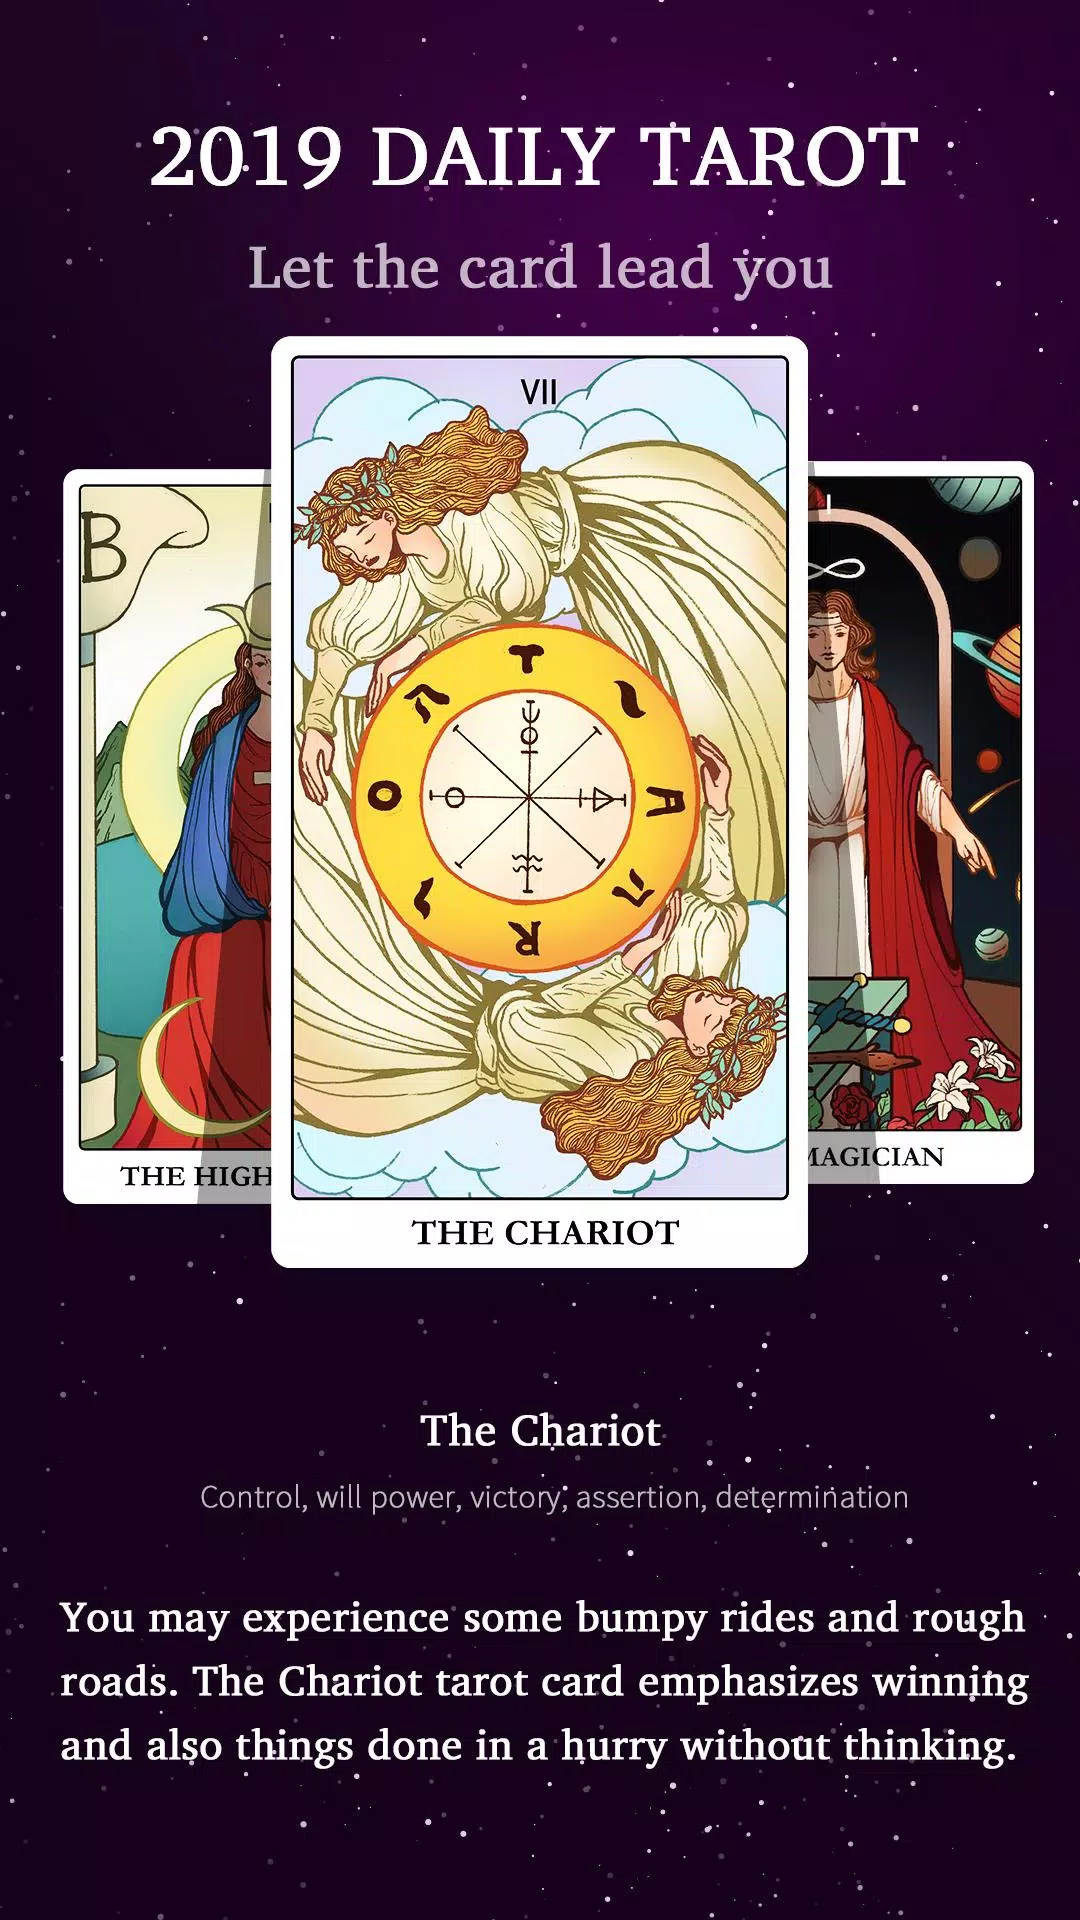 Daily Tarot Plus 2019 - Free Tarot Card Reading for Android - APK Download